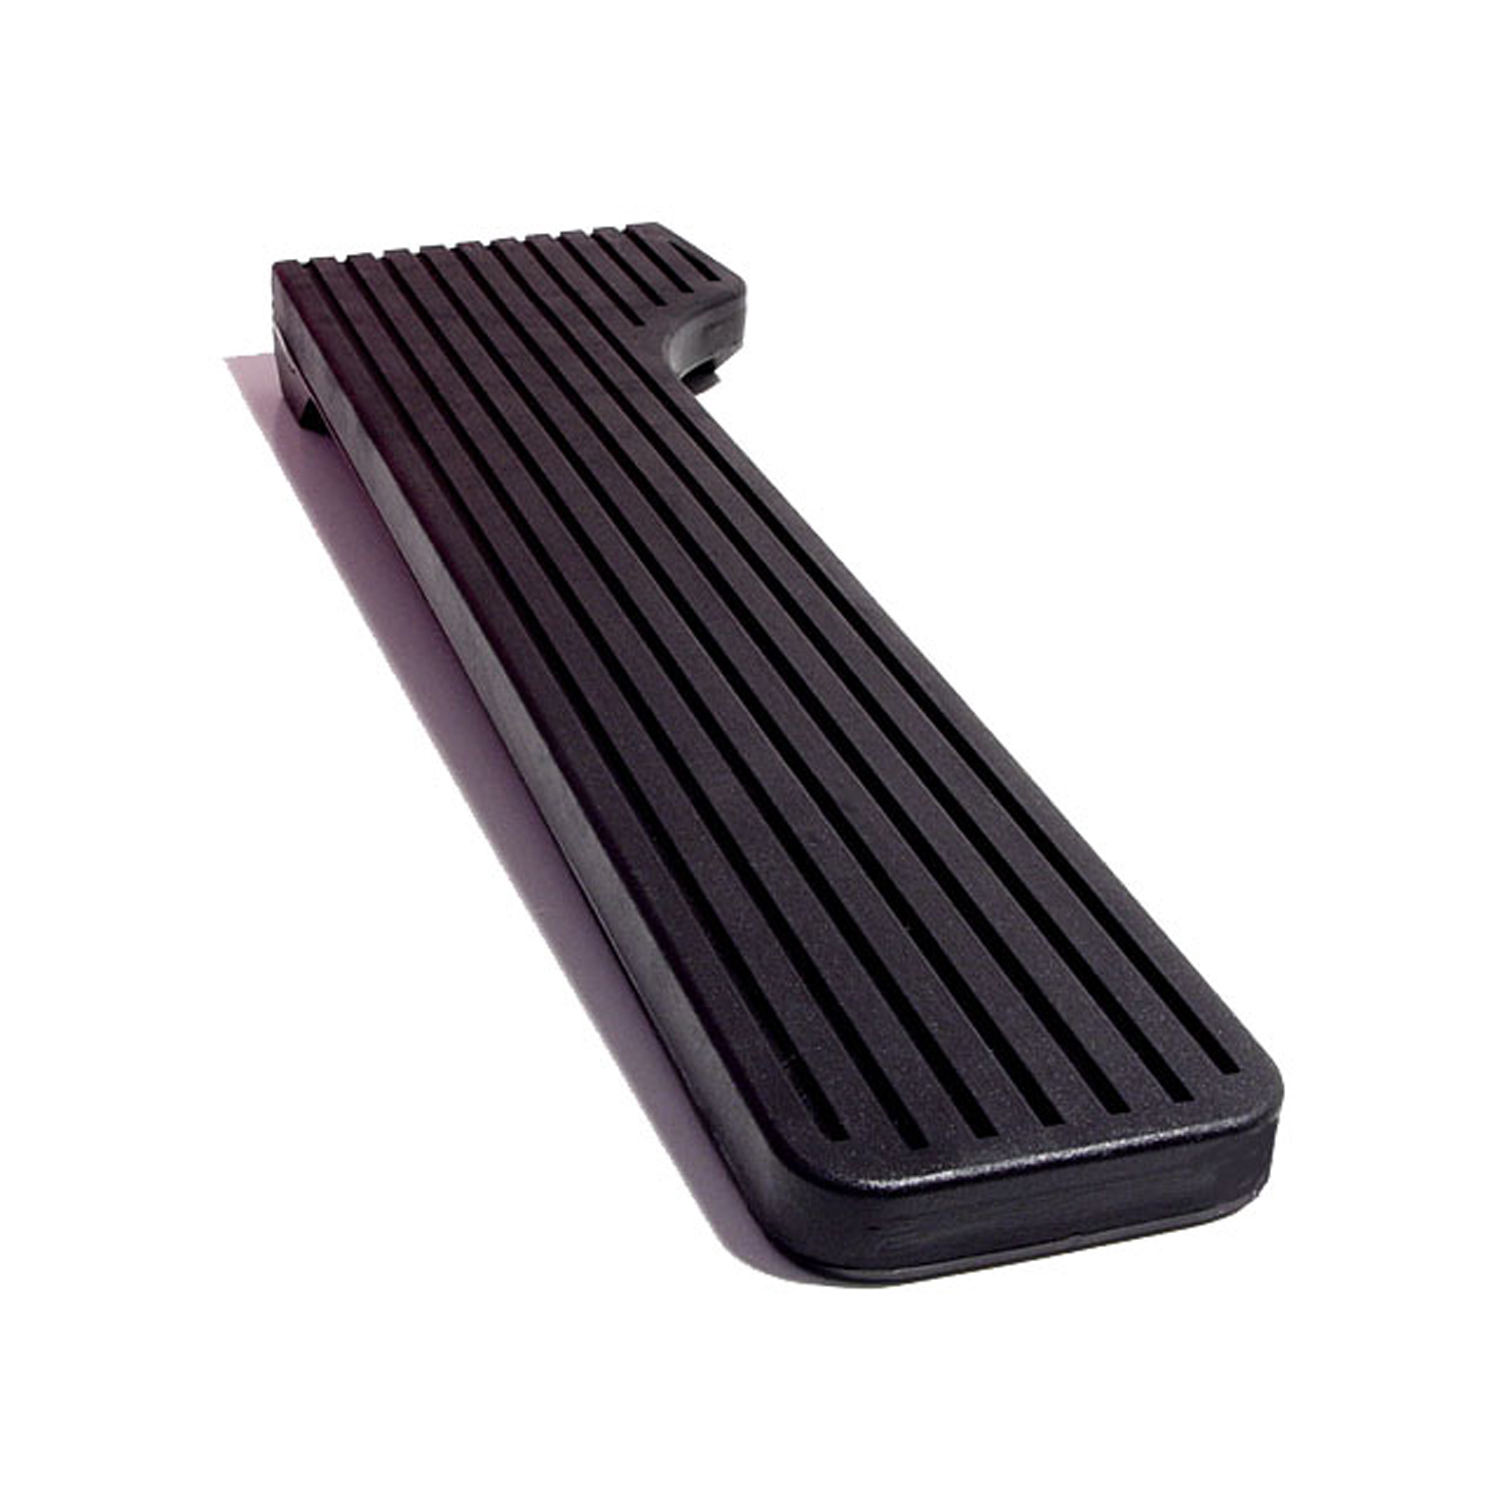 1966 Chevrolet Bel Air Accelerator Pedal Pad without flange-AP 31-B